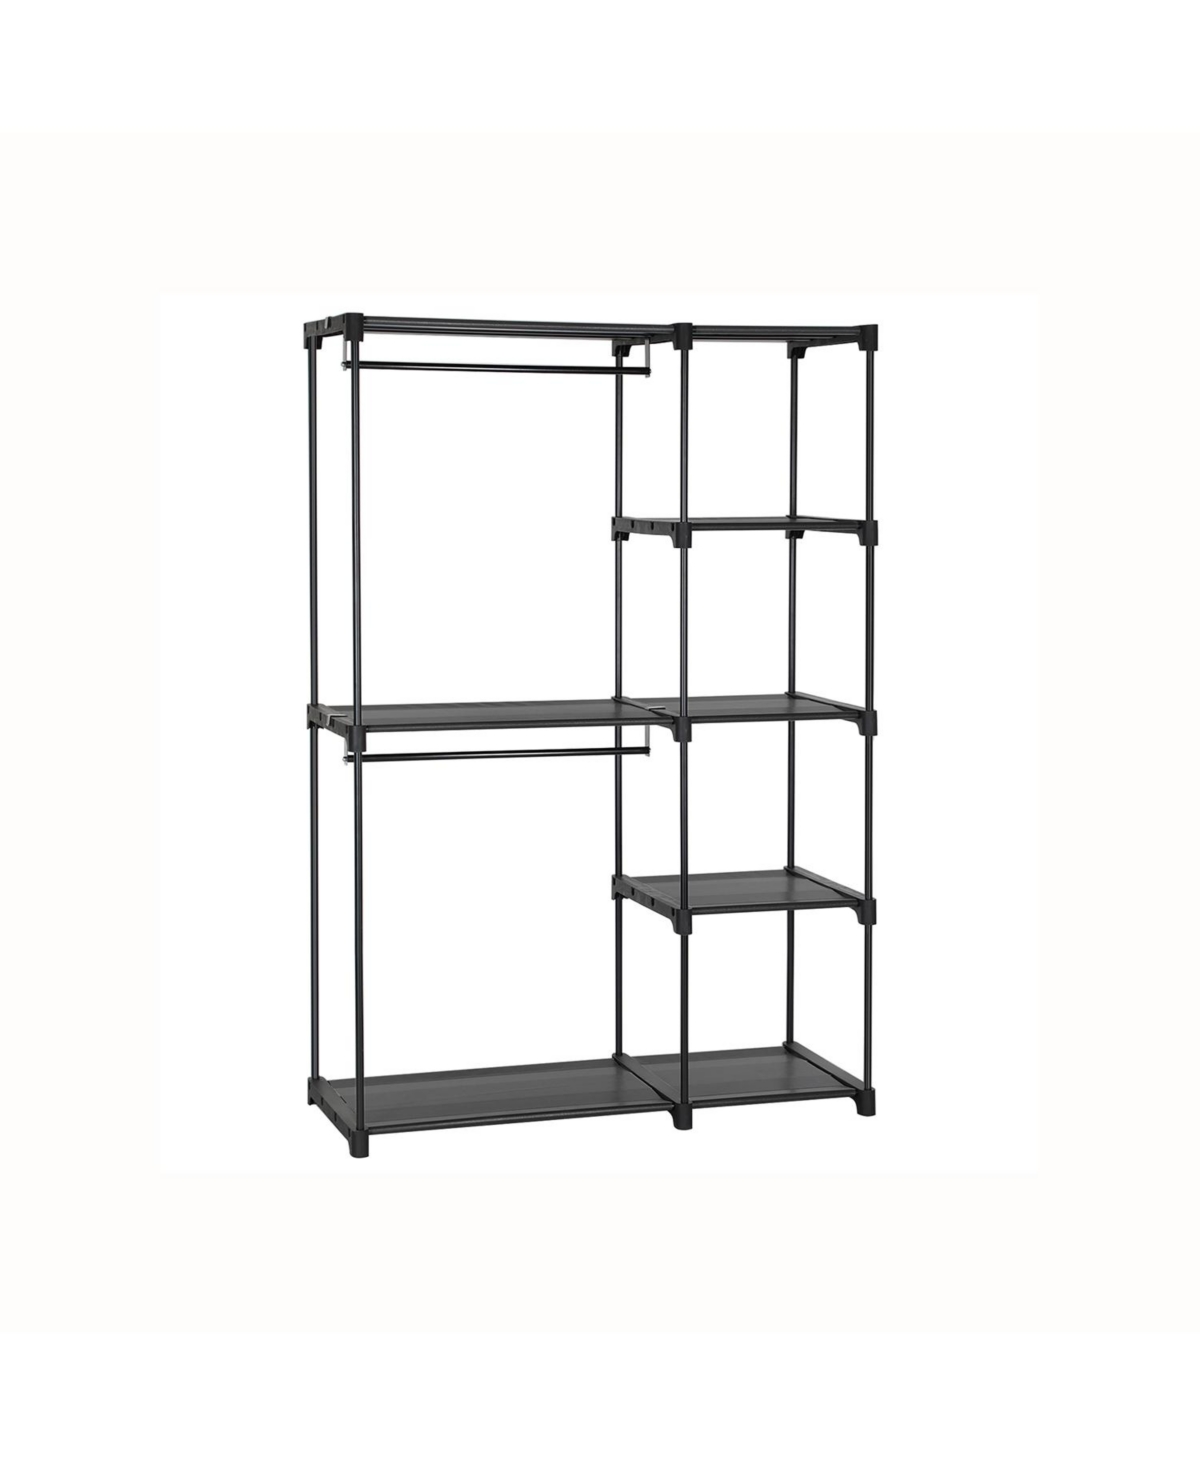 Clothes Rack, Closet Racks for Hanging Clothes, Clothes Wardrobe with 3 Hanging Rods and Shelves - Black